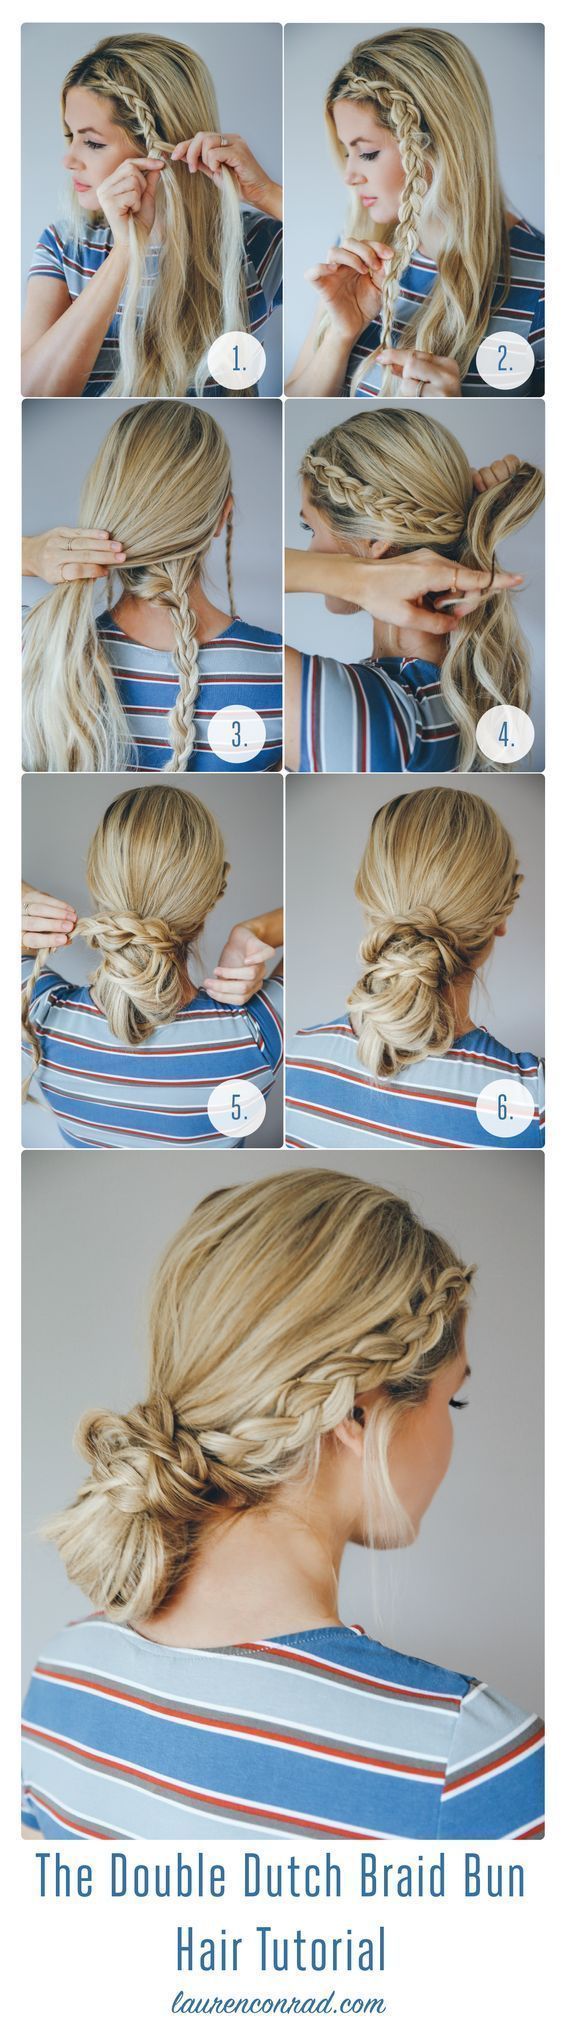 easy hairstyles for long hair: